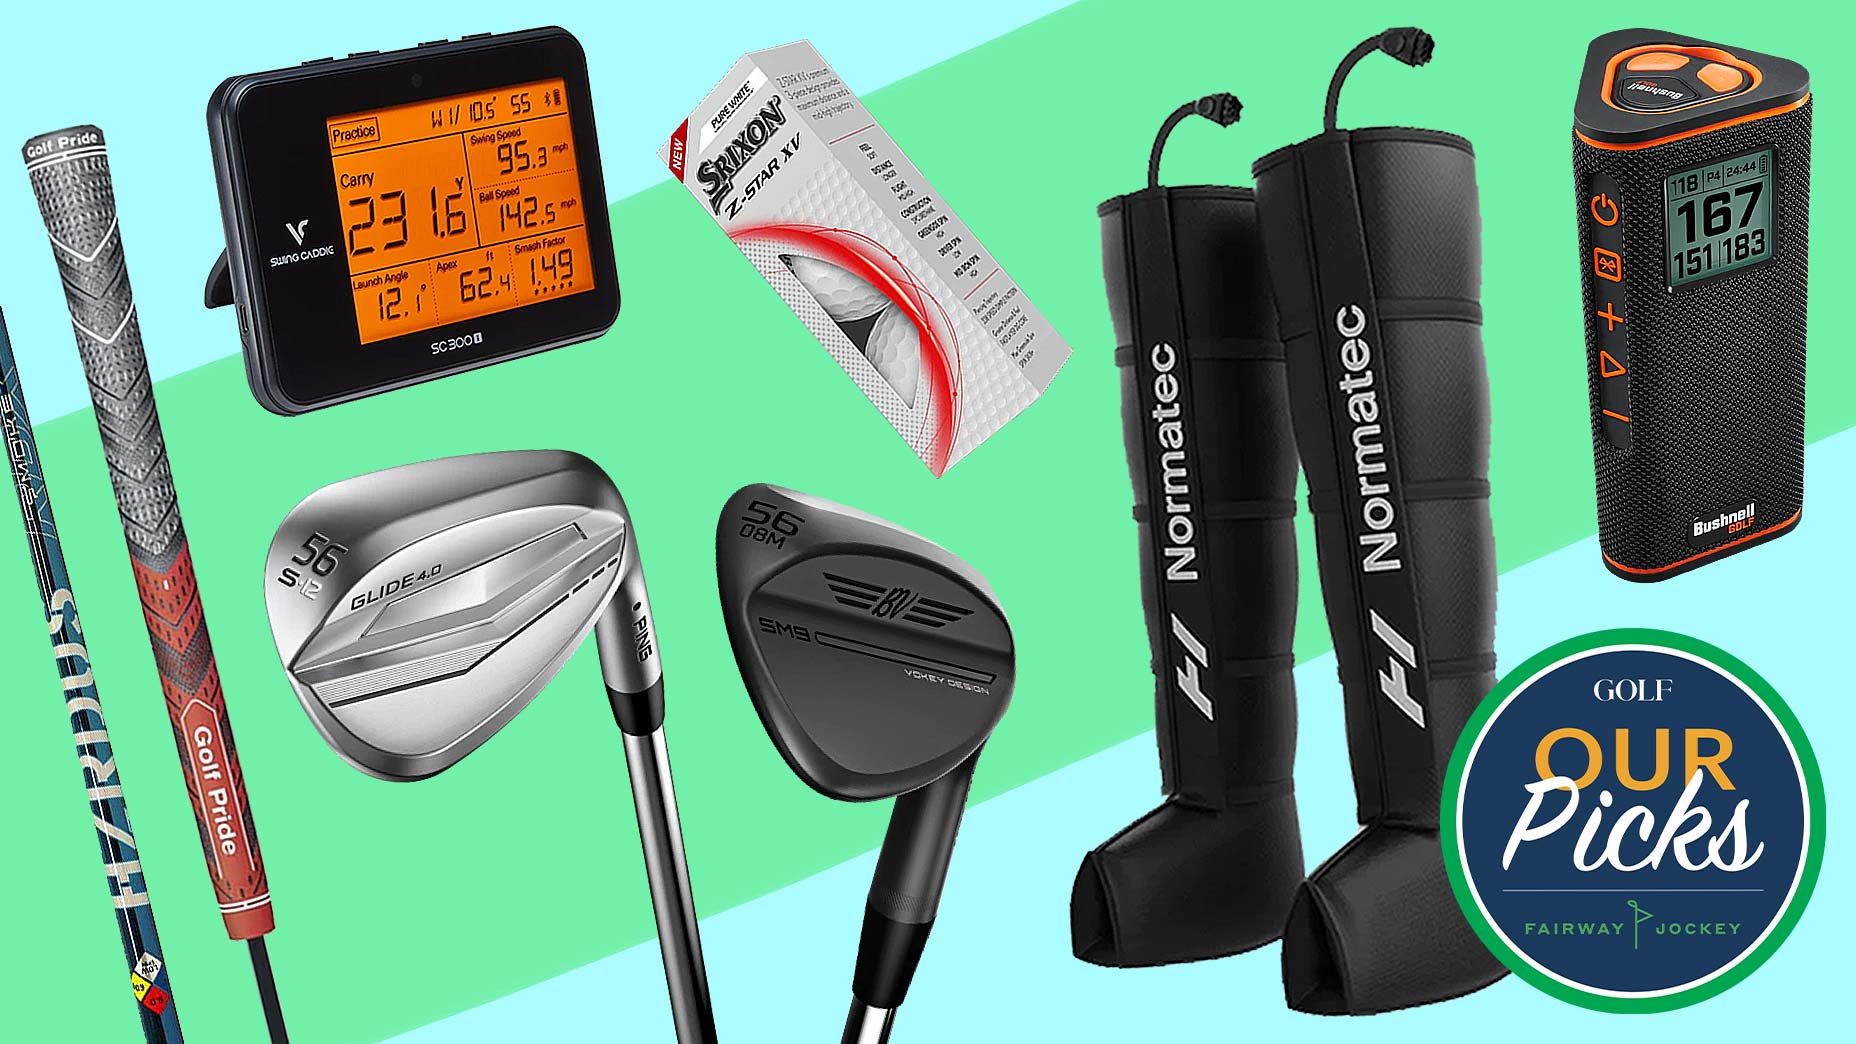 Various equipment best sellers at Fairway Jockey, including the following: Project X shaft, Golf Pride Grip, Ping Glide 4.0 Wedge, 56 degree Vokey Wedge, Swing Caddie Launch Monitor, Normatec Leg Therapy by Hyperice, and the Bushnell Wingman View.